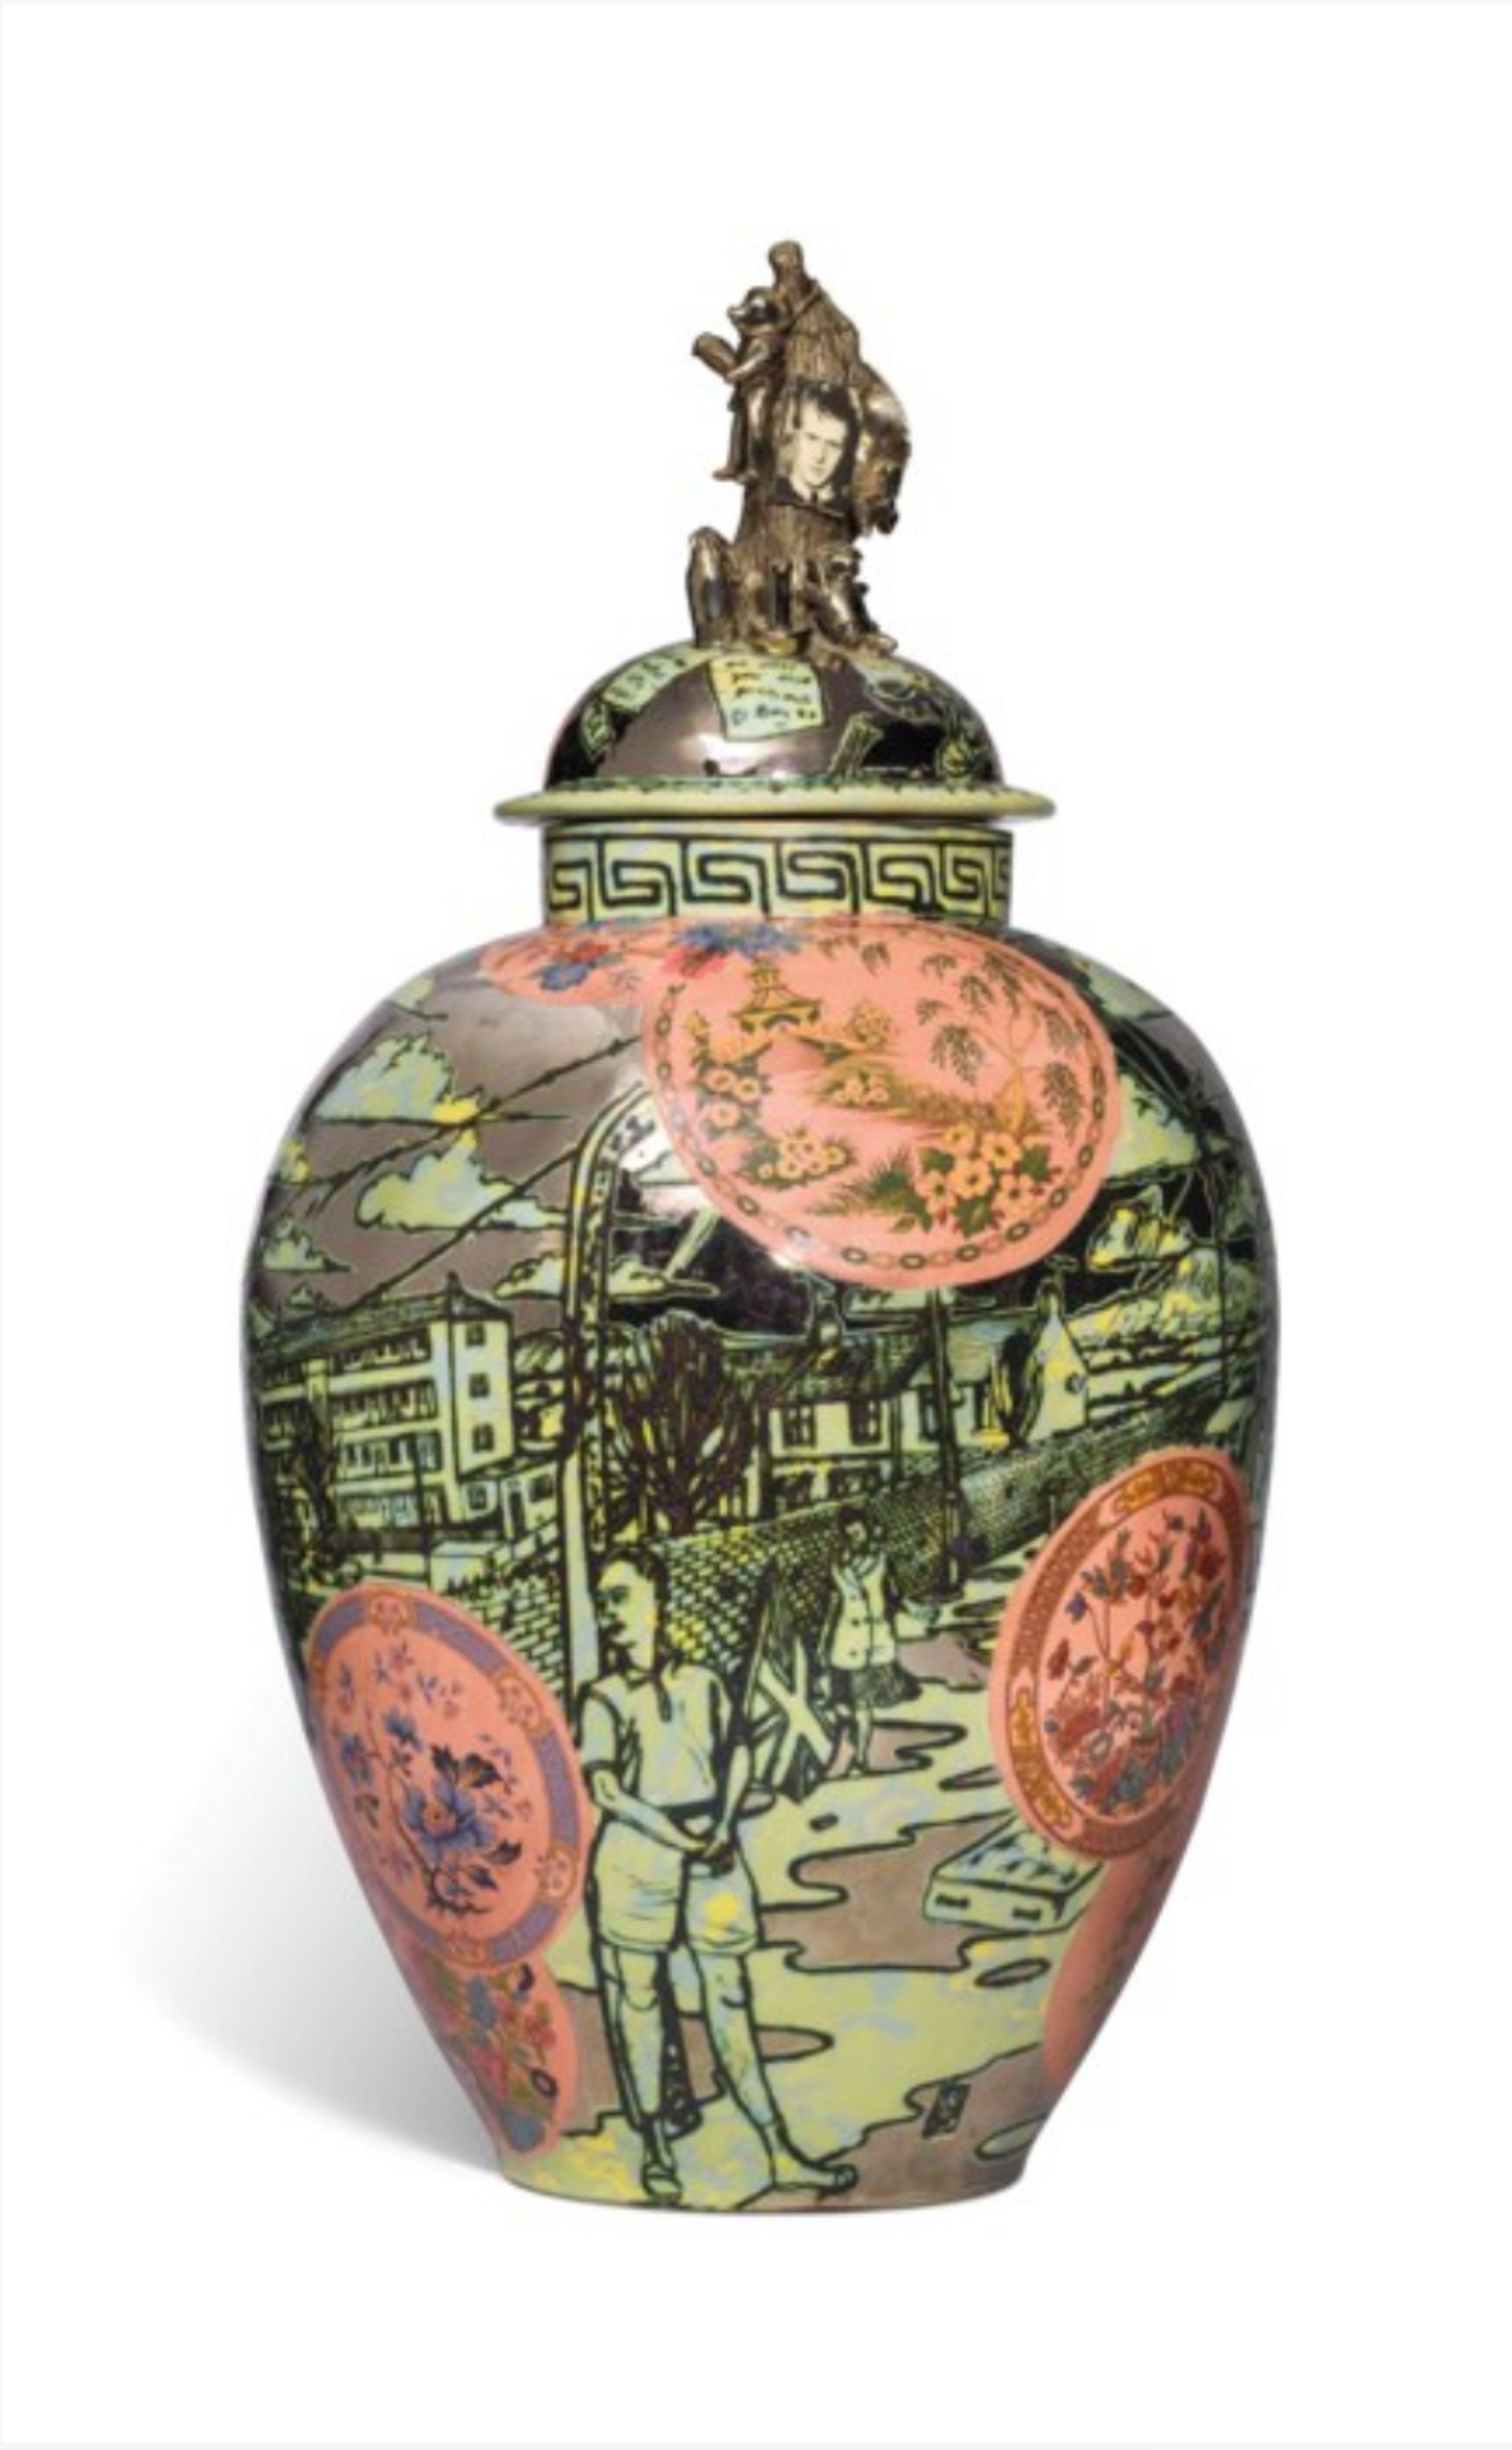 Ceramic vase made by Grayson Perry, depicting a young rendering of himself standing in a working class town. 